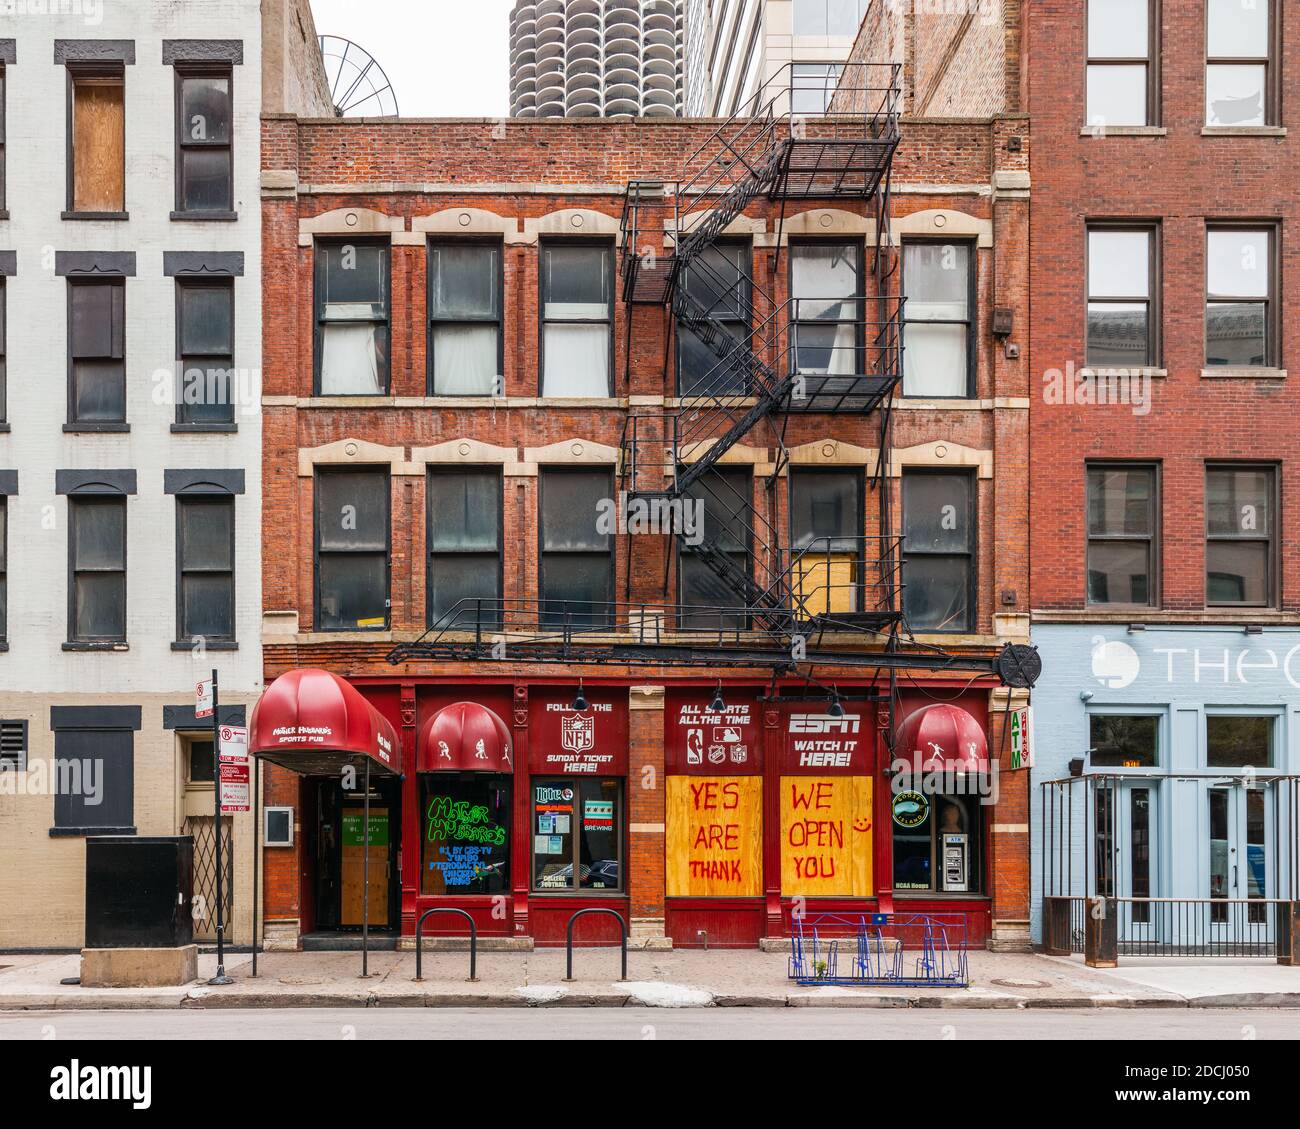 19th Century buildings in the River North neighborhood Stock Photo